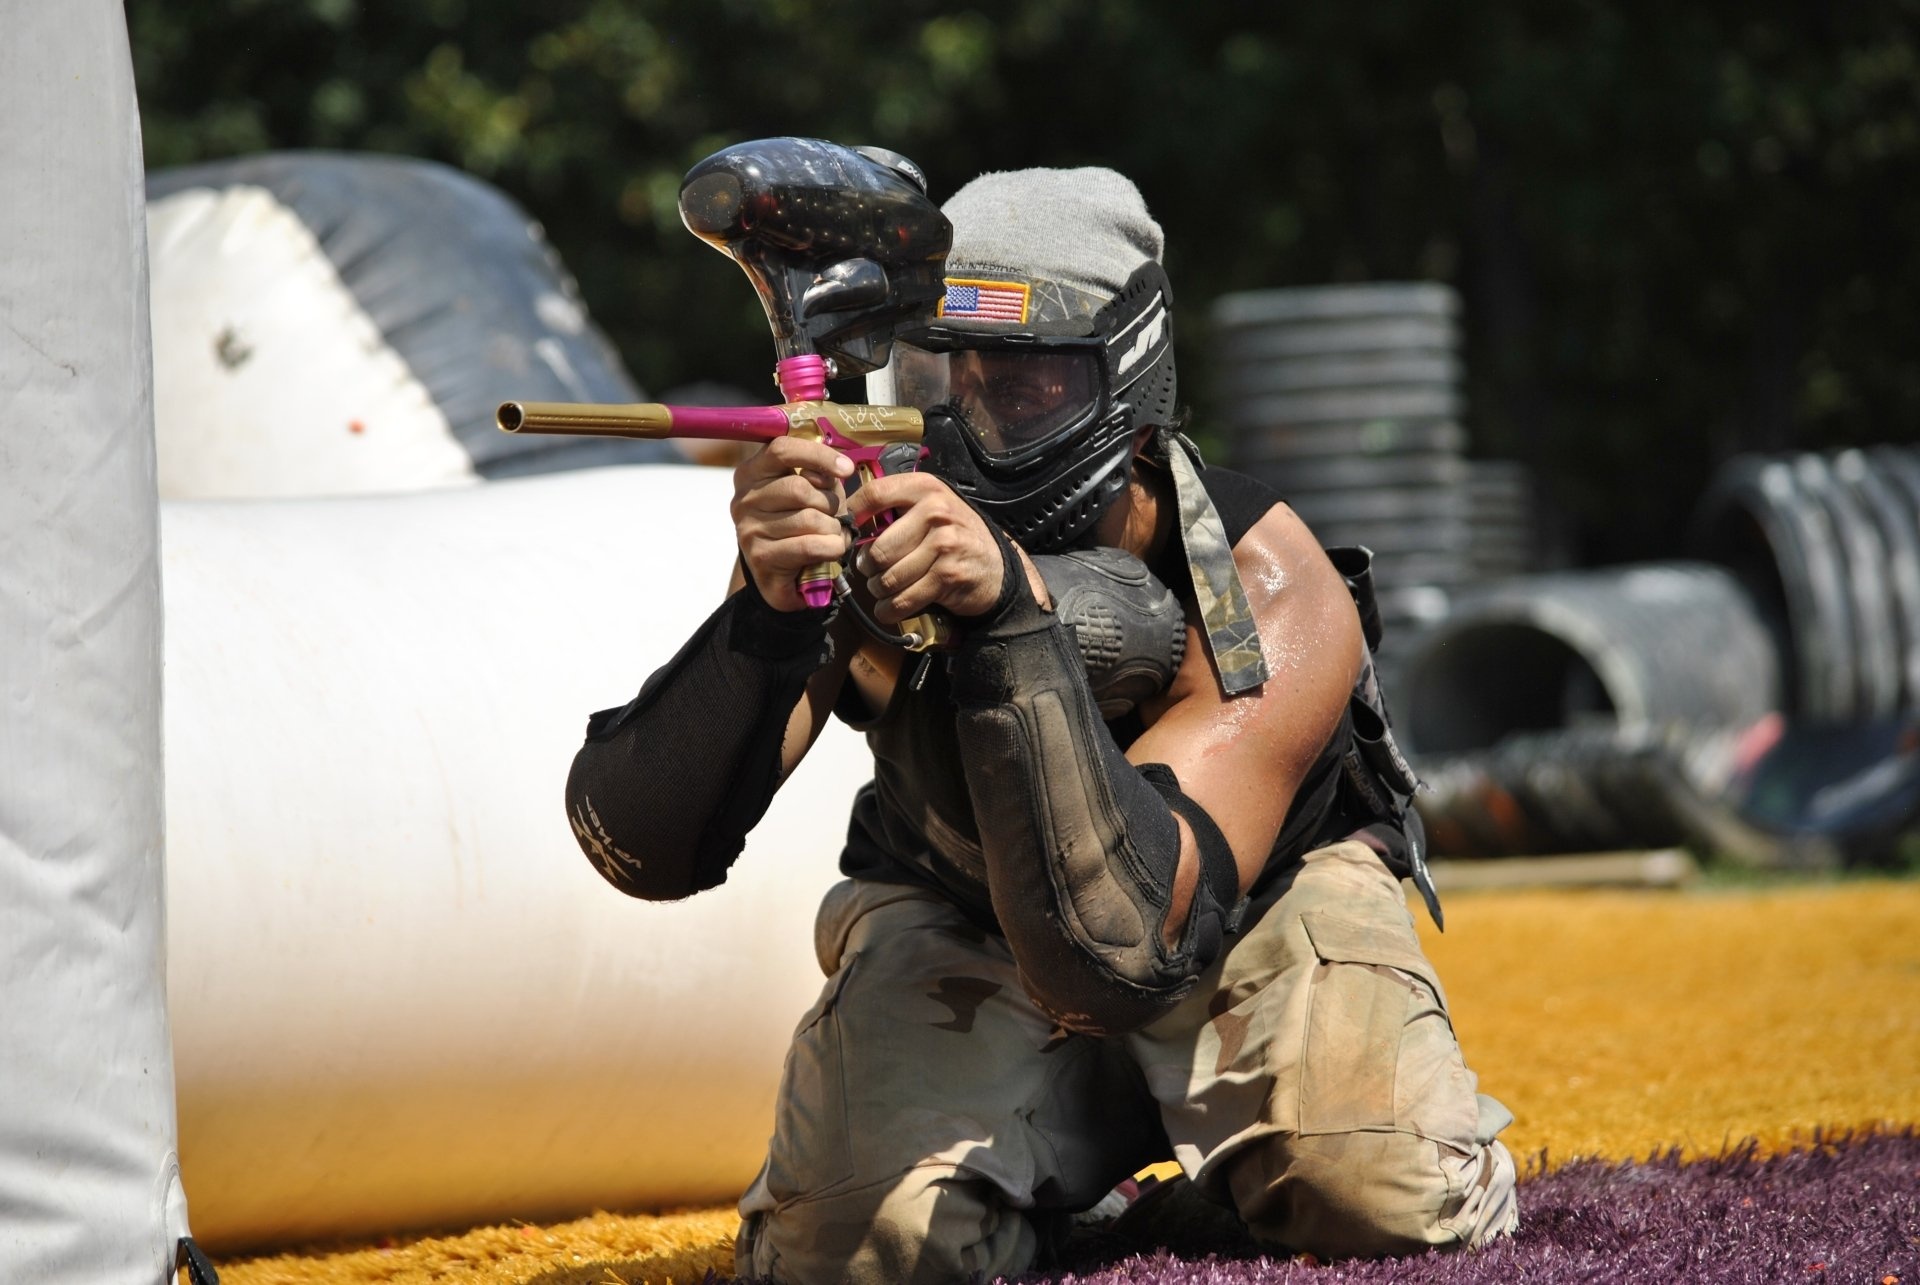 Paintball: The US team player shoots during the International Paint shooting Competition. 1920x1290 HD Background.